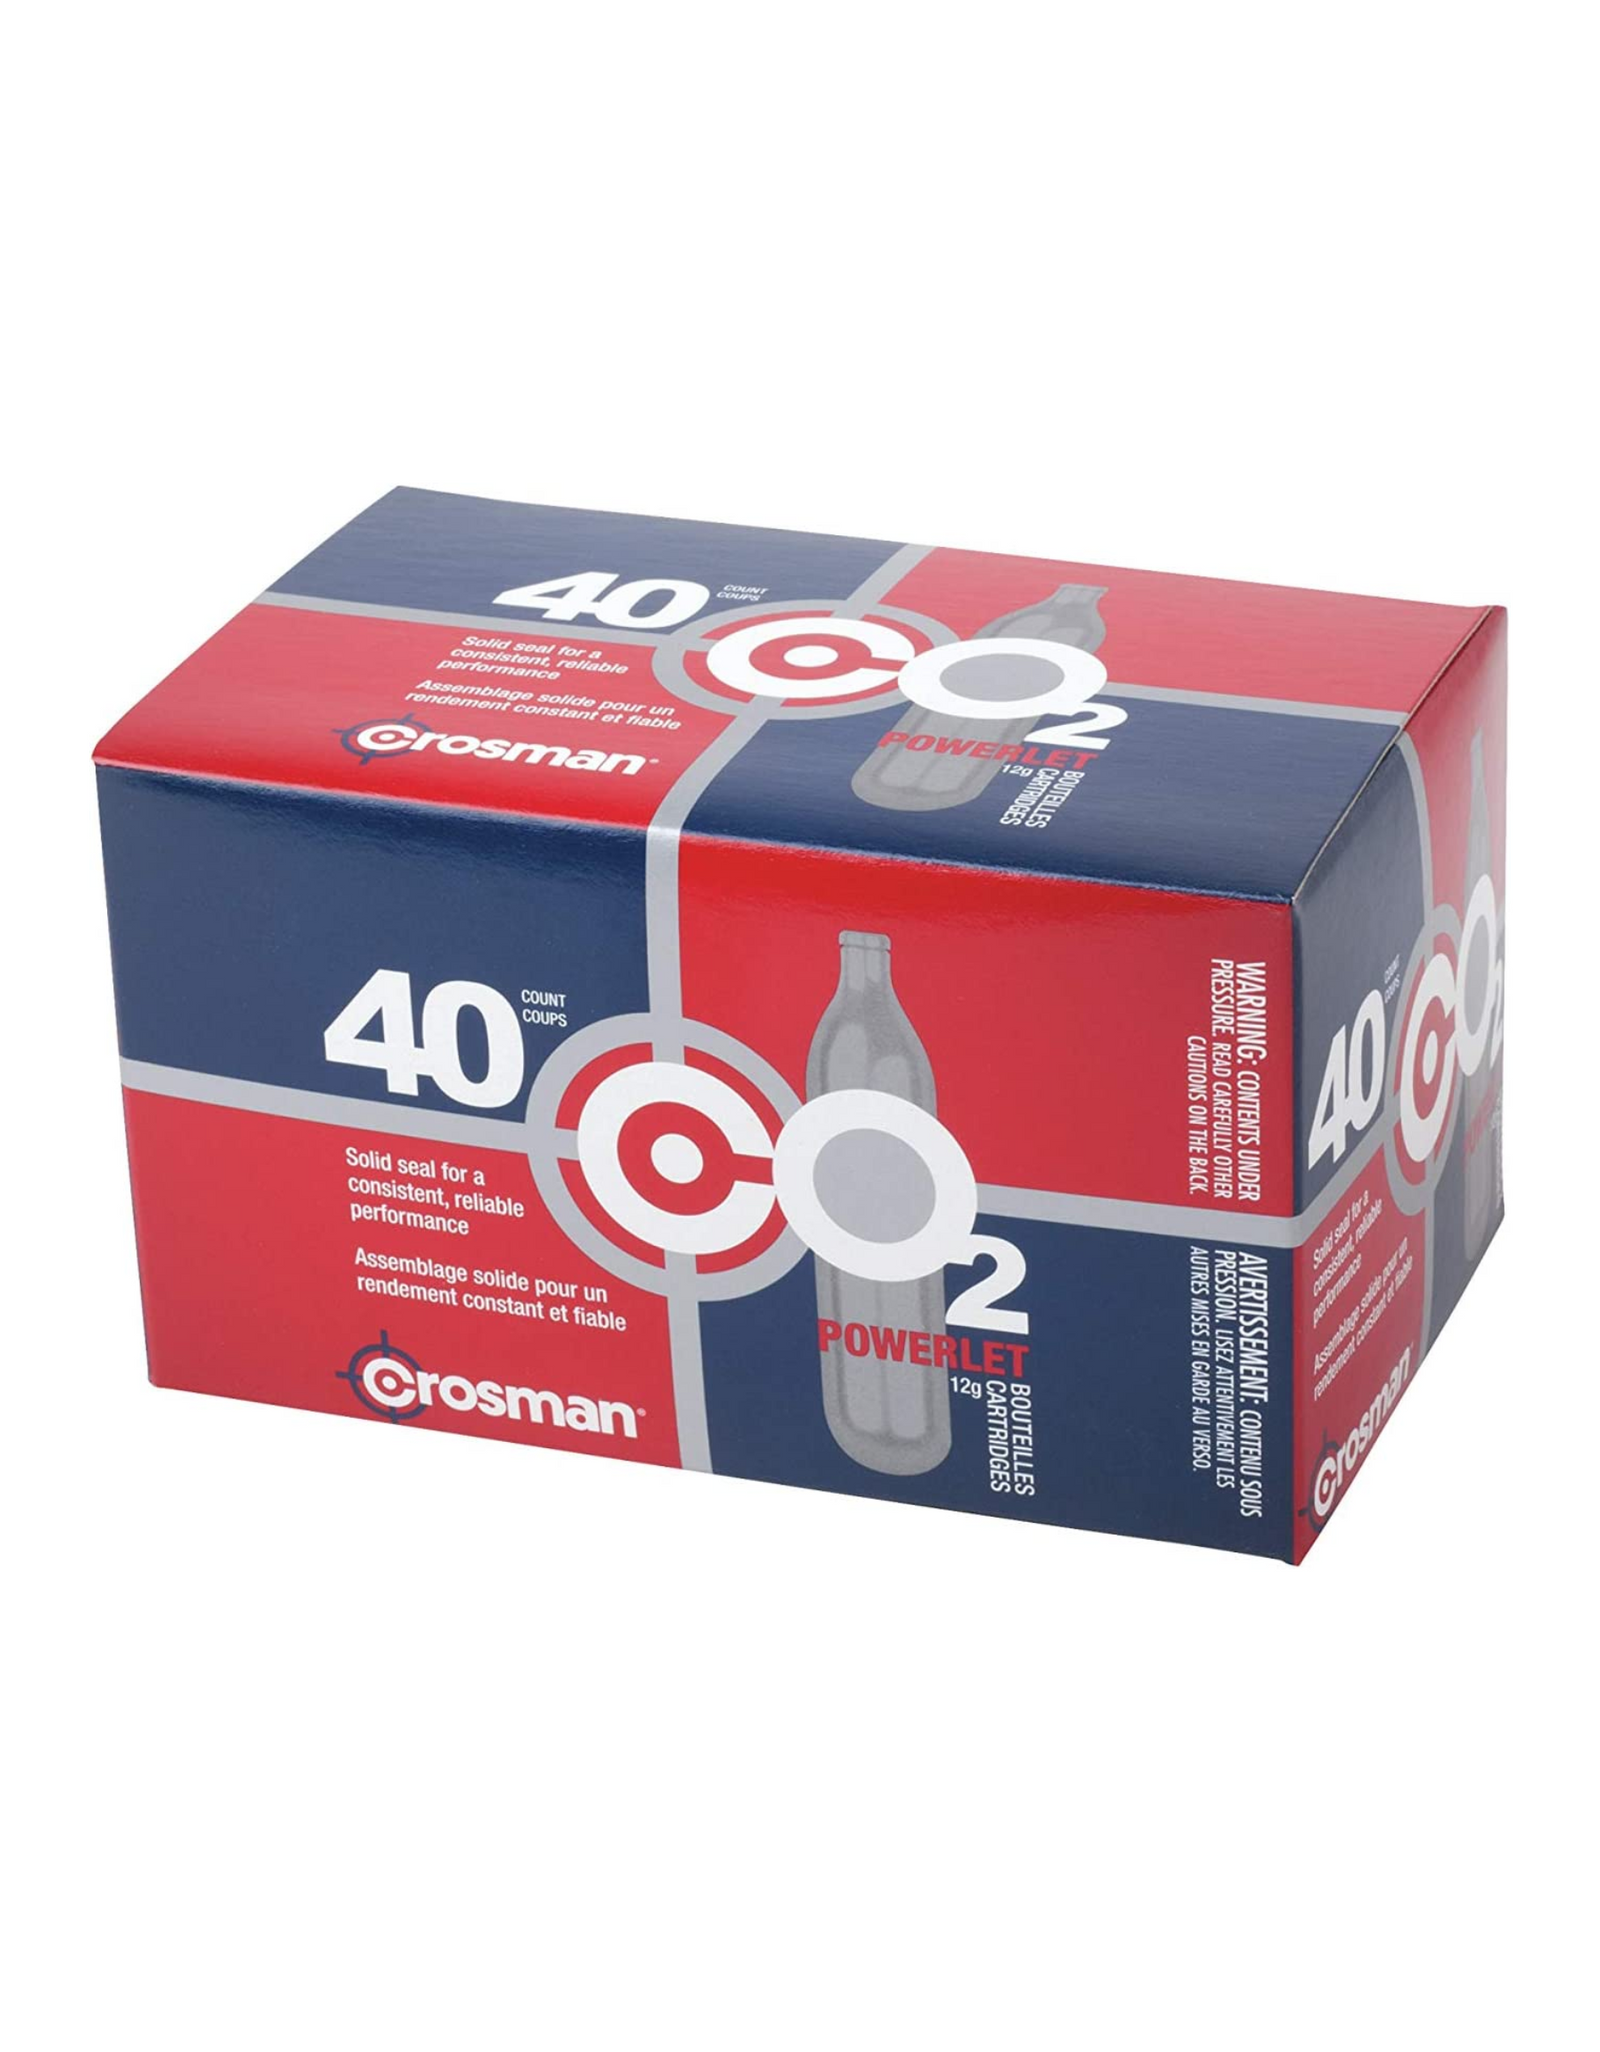 Crosman 12-Gram CO2 Powerlet Cartridges for Use with Air Rifles and Air Pistols, 40 Ct